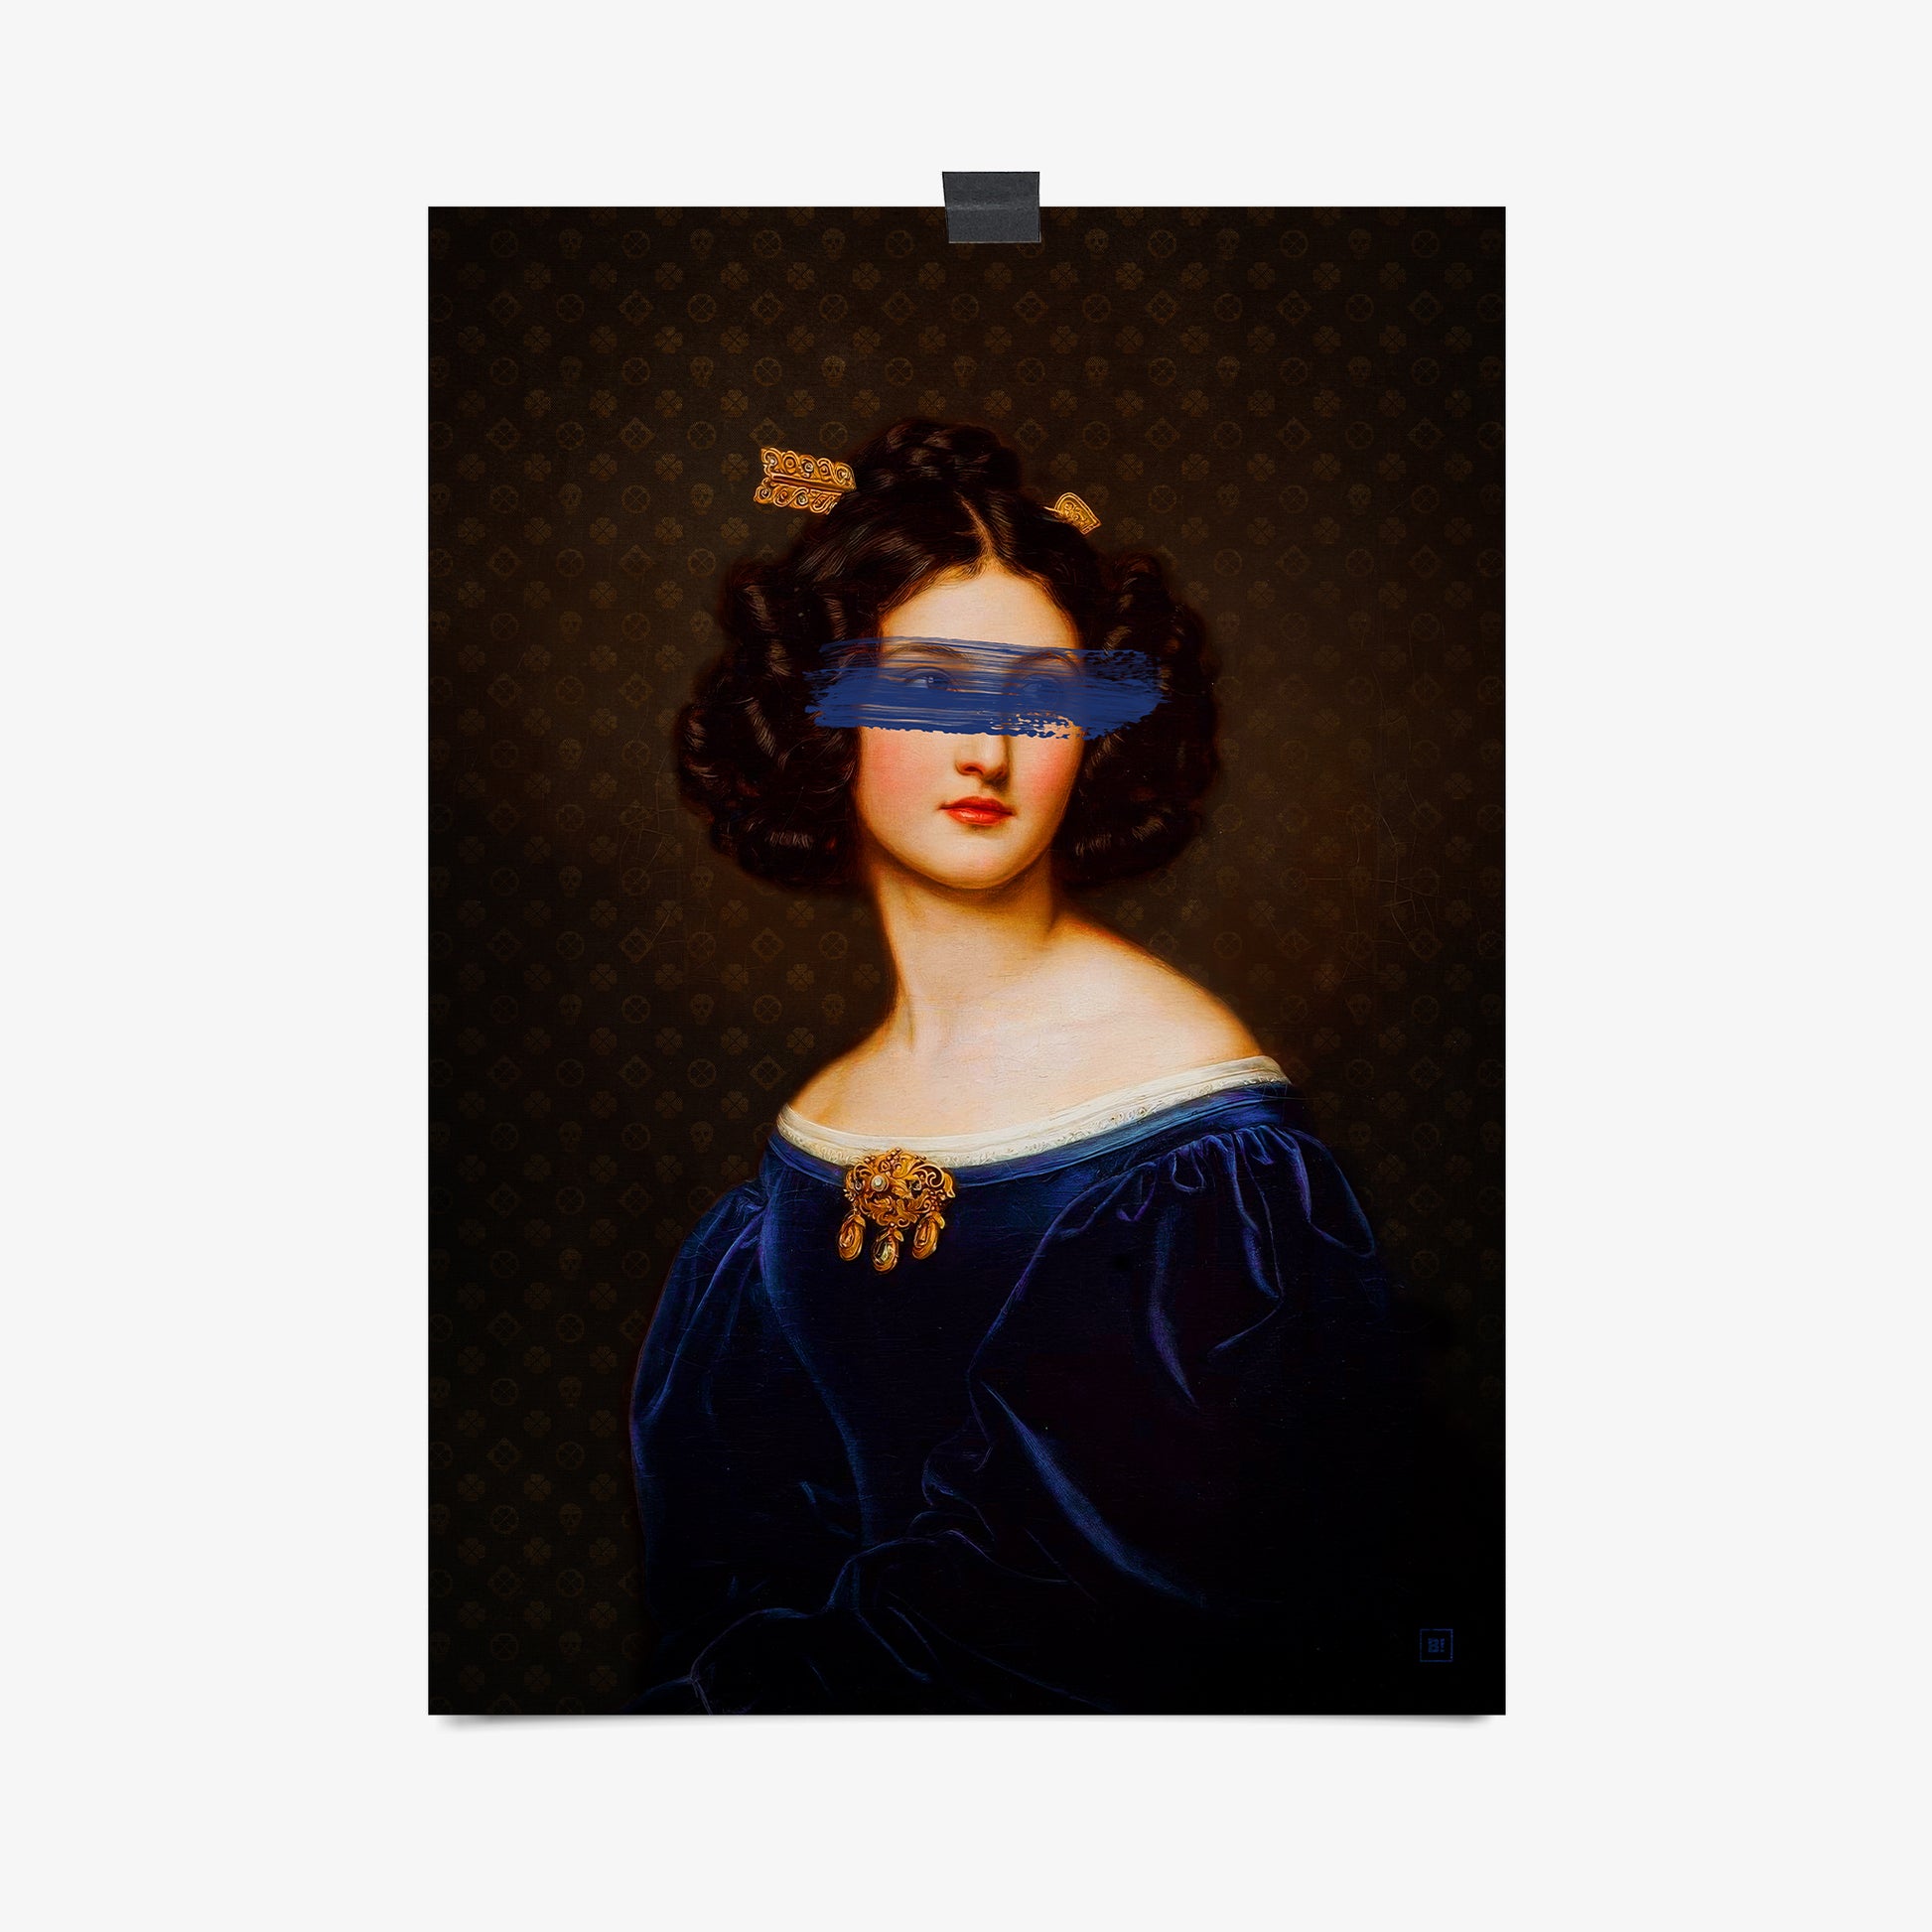 Be inspired by our "Dark and Moody Portrait of Nanette" art print! This artwork was printed using the giclée process on archival acid-free paper, capturing its timeless beauty in every detail.